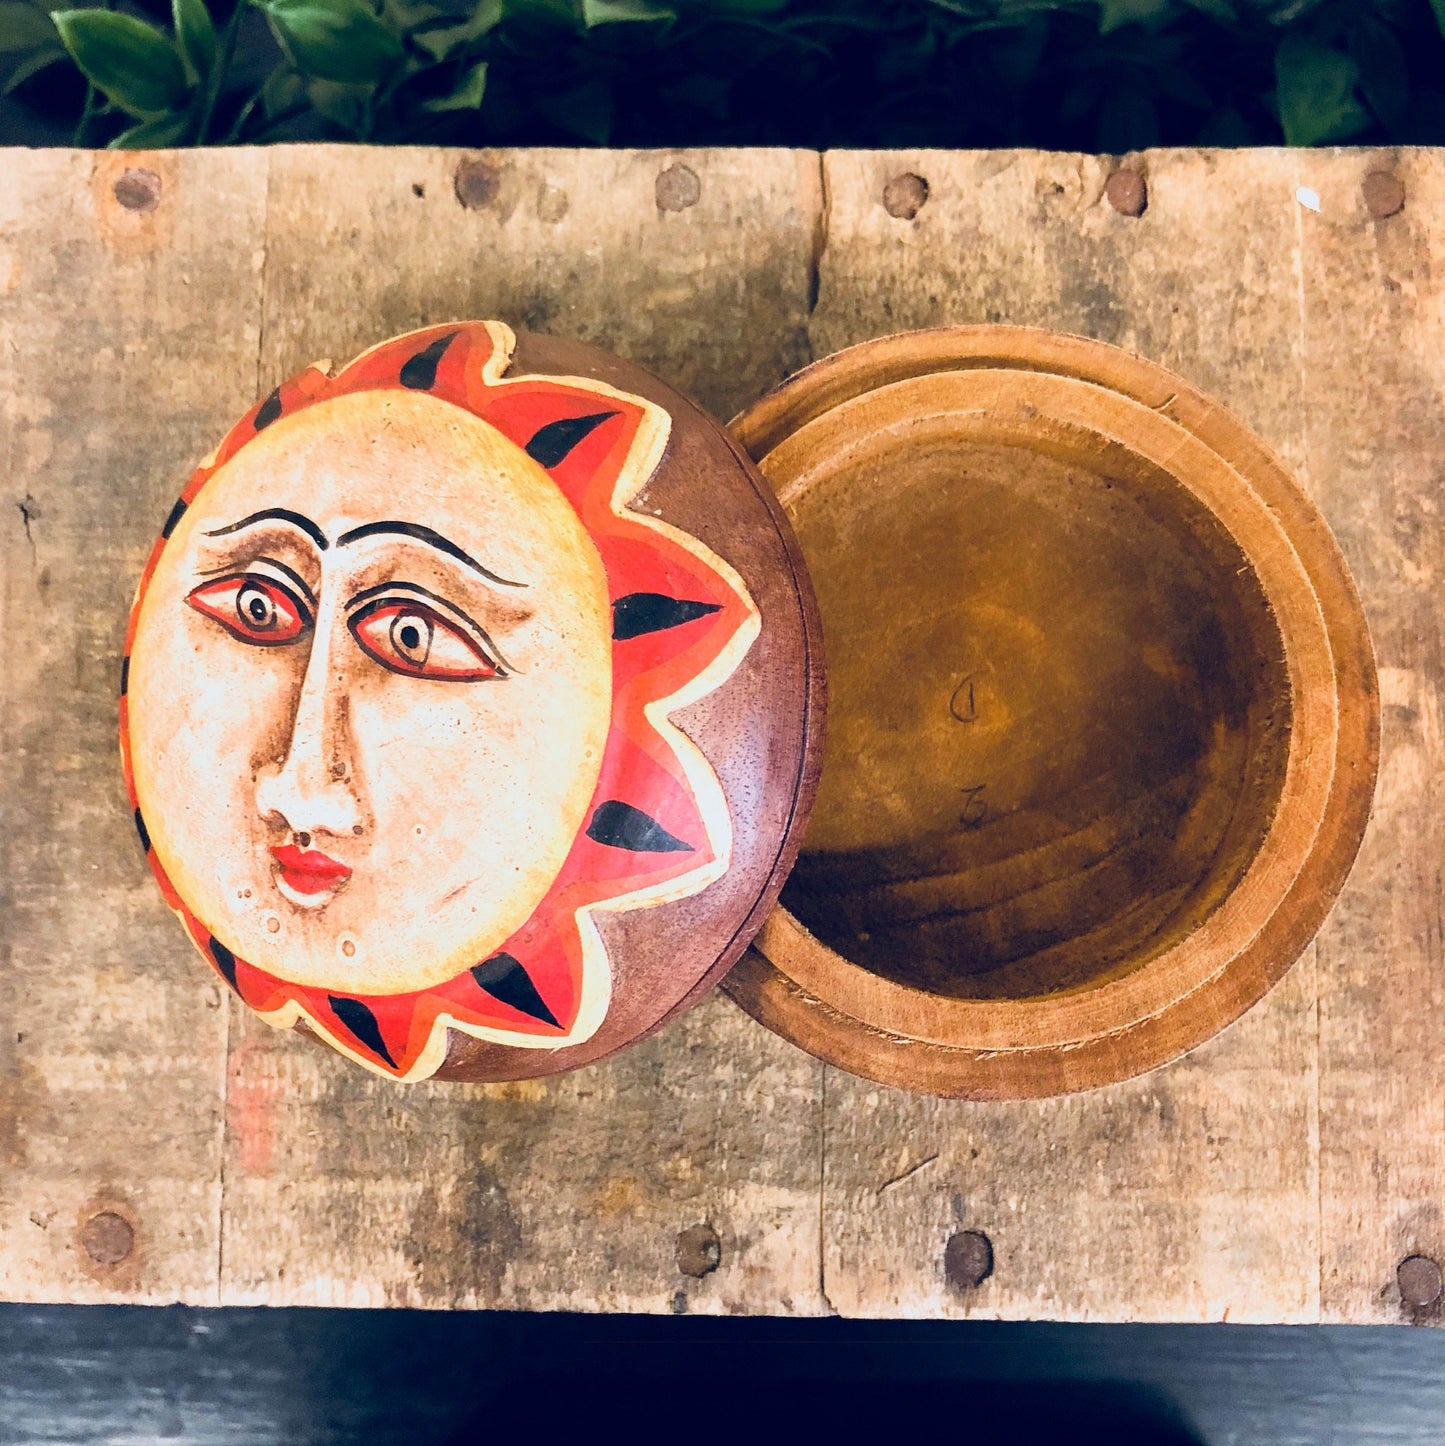 Vintage hand-carved wooden jewelry box with a colorful sun face design in red, orange and yellow tones on the lid, displayed on a rustic wooden surface.